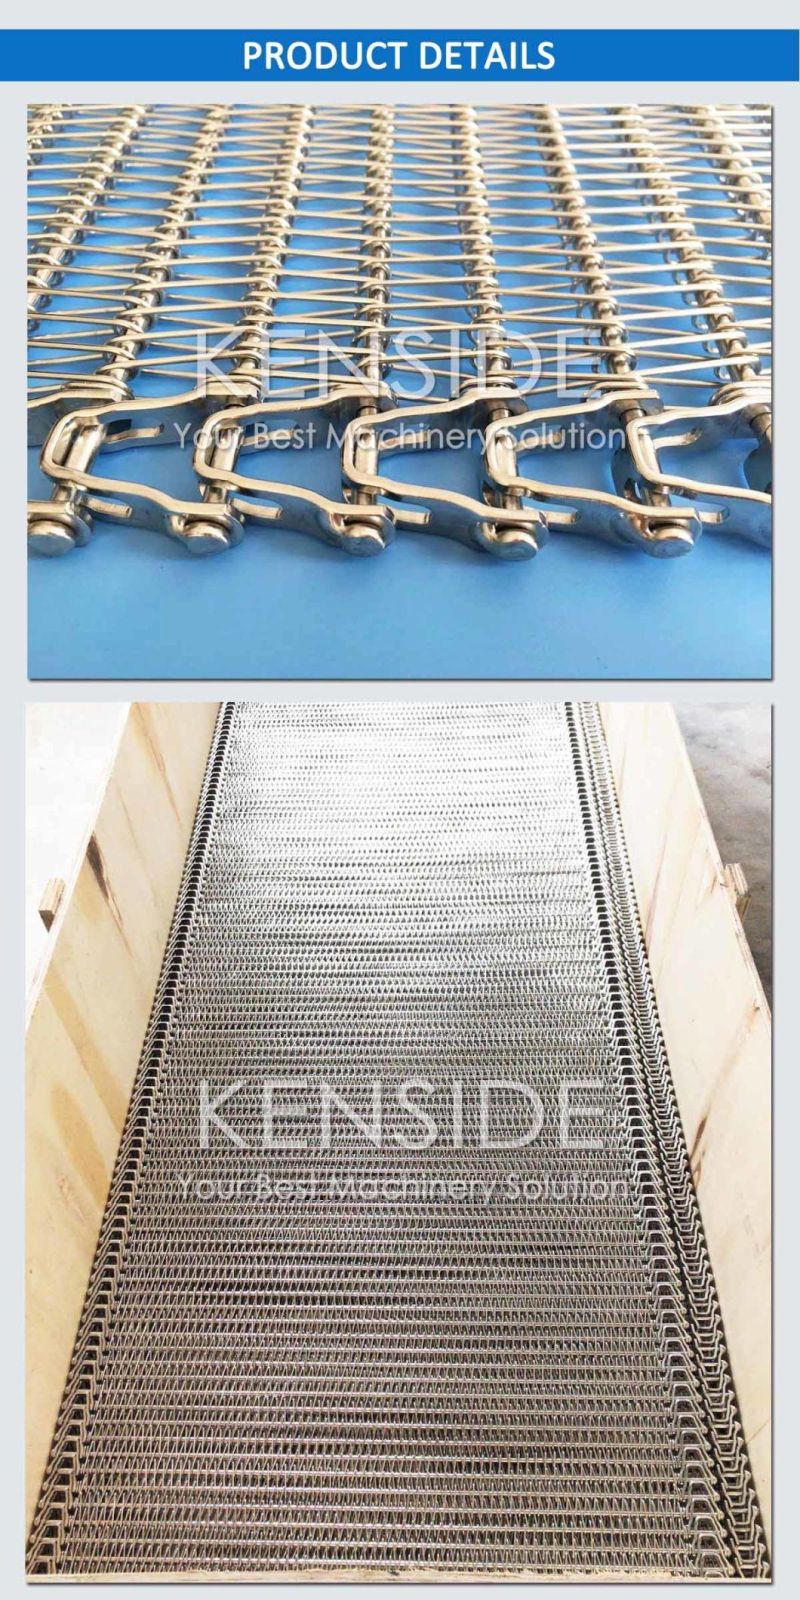 Stainless Steel Belting Spiral Conveyor Belts Reduced Radius Belts for Spiral Cage Systems